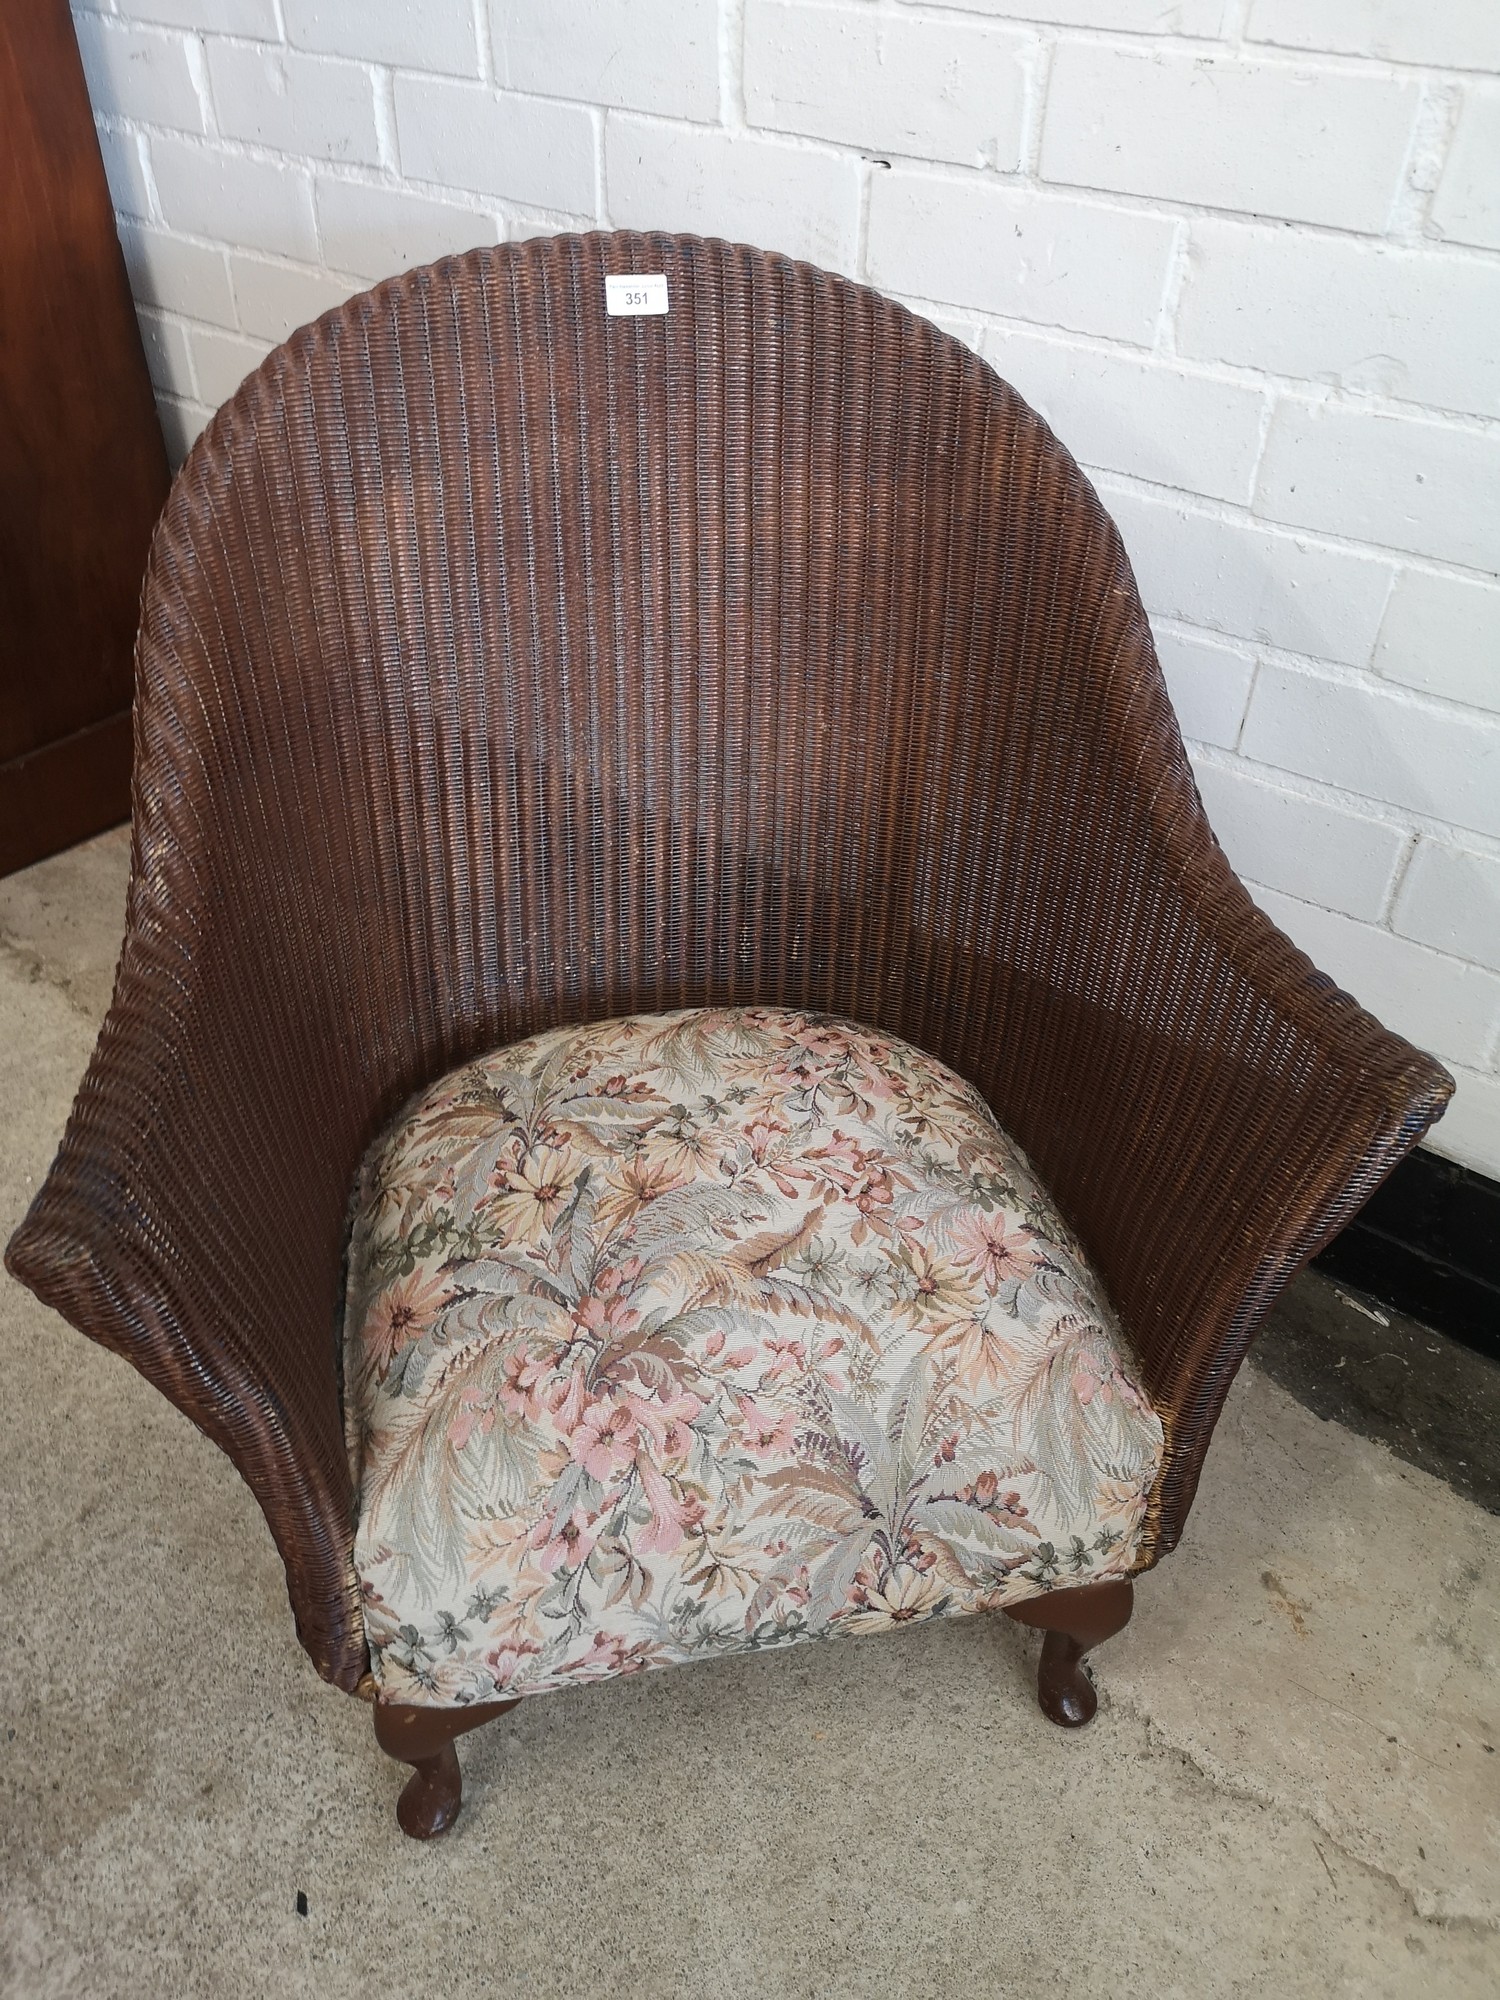 Lloyd loom style wicker chair with upholstery. - Image 2 of 5